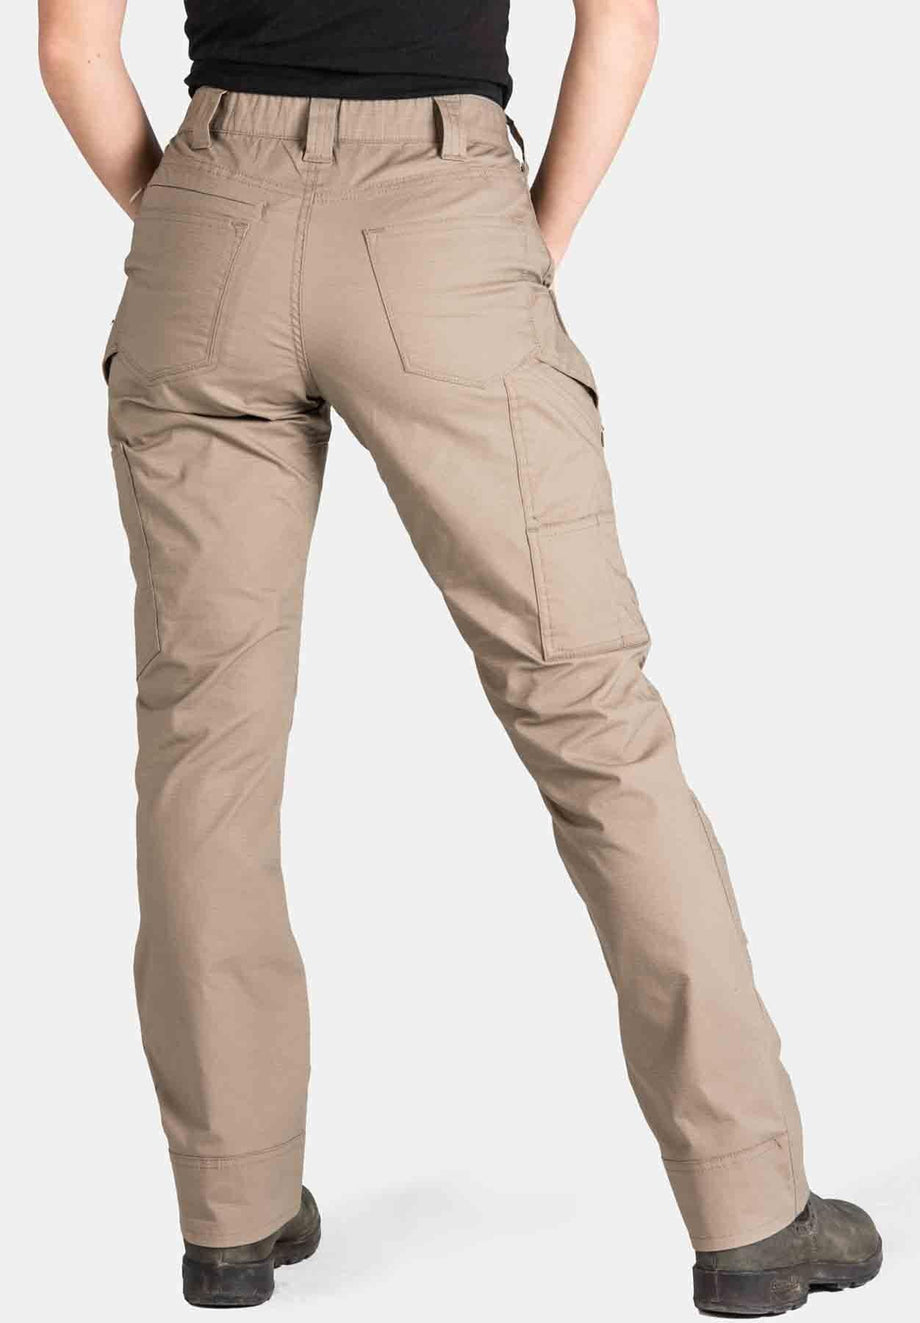 12 Best Tactical Pants for Hunting Hiking and Law Enforcement